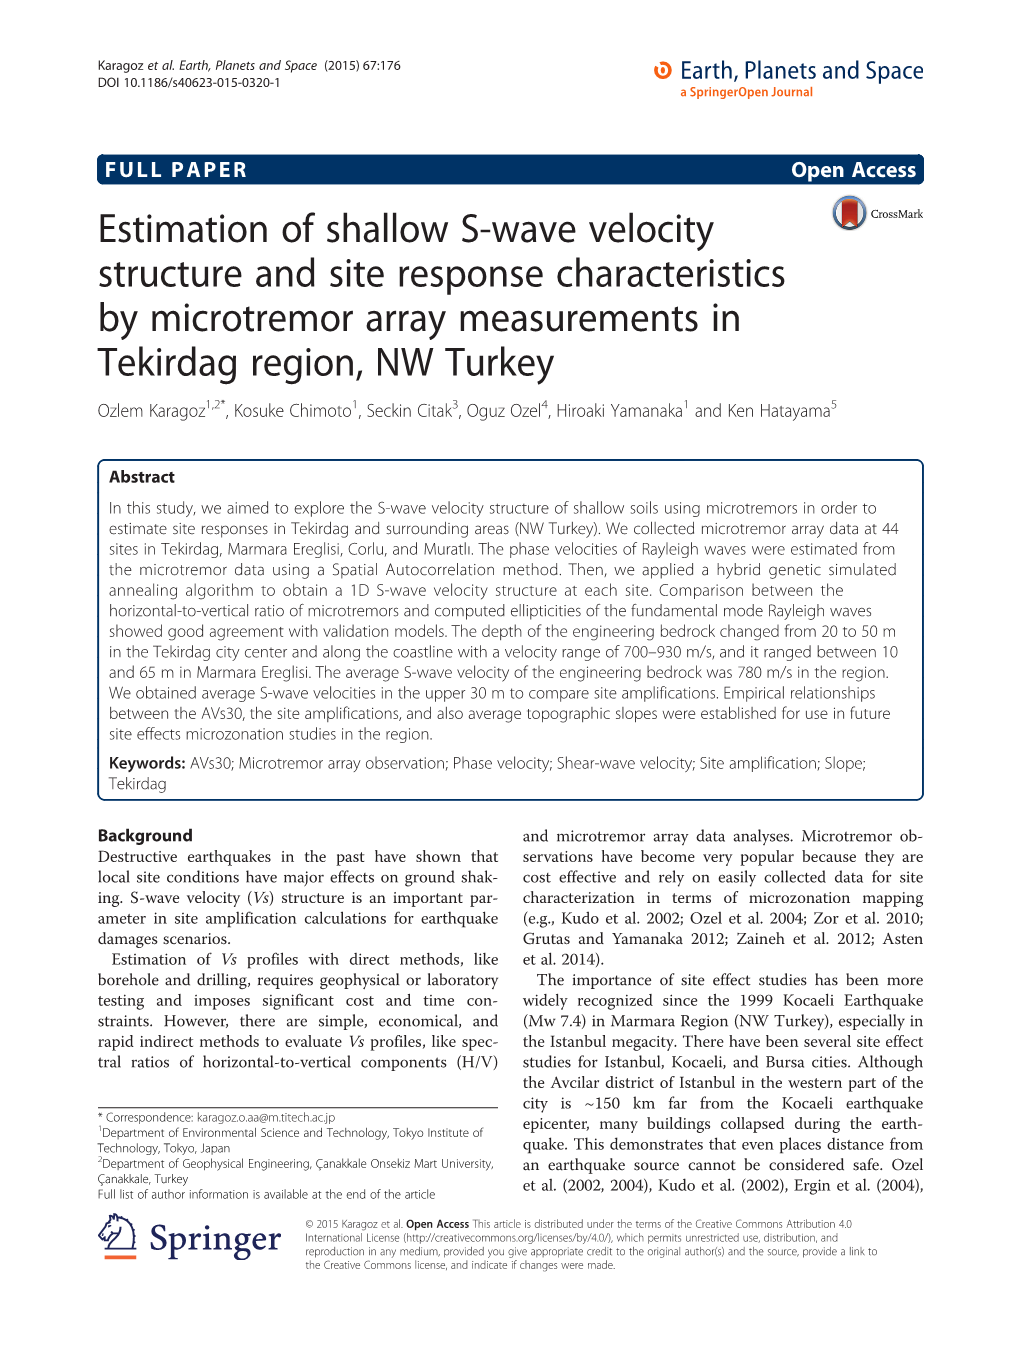 Estimation of Shallow S-Wave Velocity Structure and Site Response